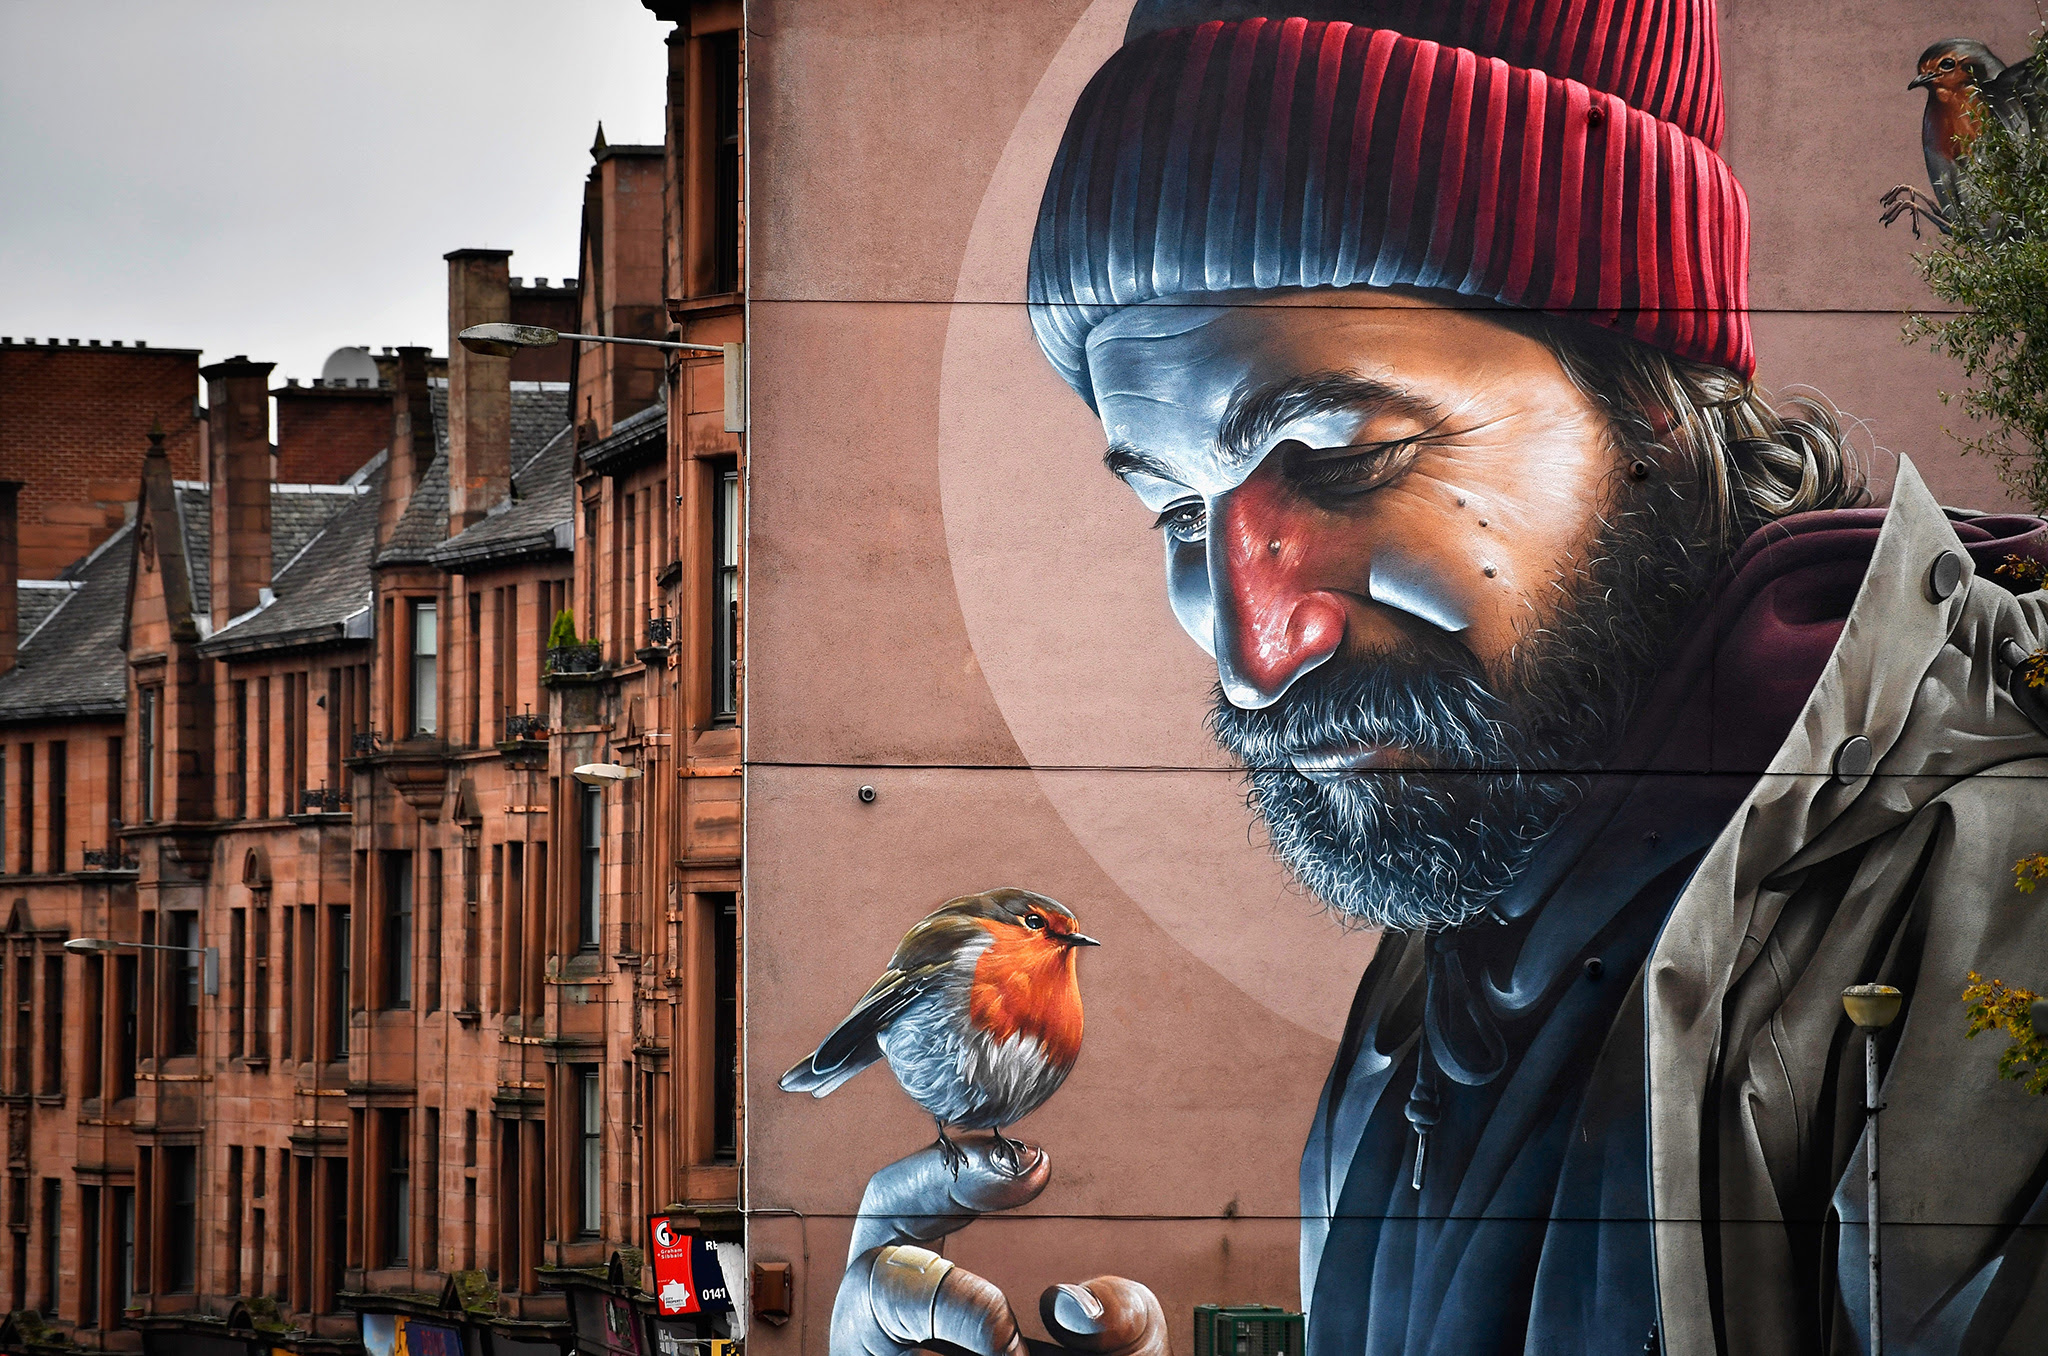 A view of one of the latest murals near Glasgow cathedral on October 26, 2016 in Glasgow, Scotland. The murals have been appearing across the city for a since 2008 with new ones appearing on a regular bases rejuvenating bare walls revitalising tired corners of Glasgow. Now a new Mural Trail has been devised with a huge range of them on display within a short walking distance from the city centre.  (Photo by Jeff J Mitchell/Getty Images)